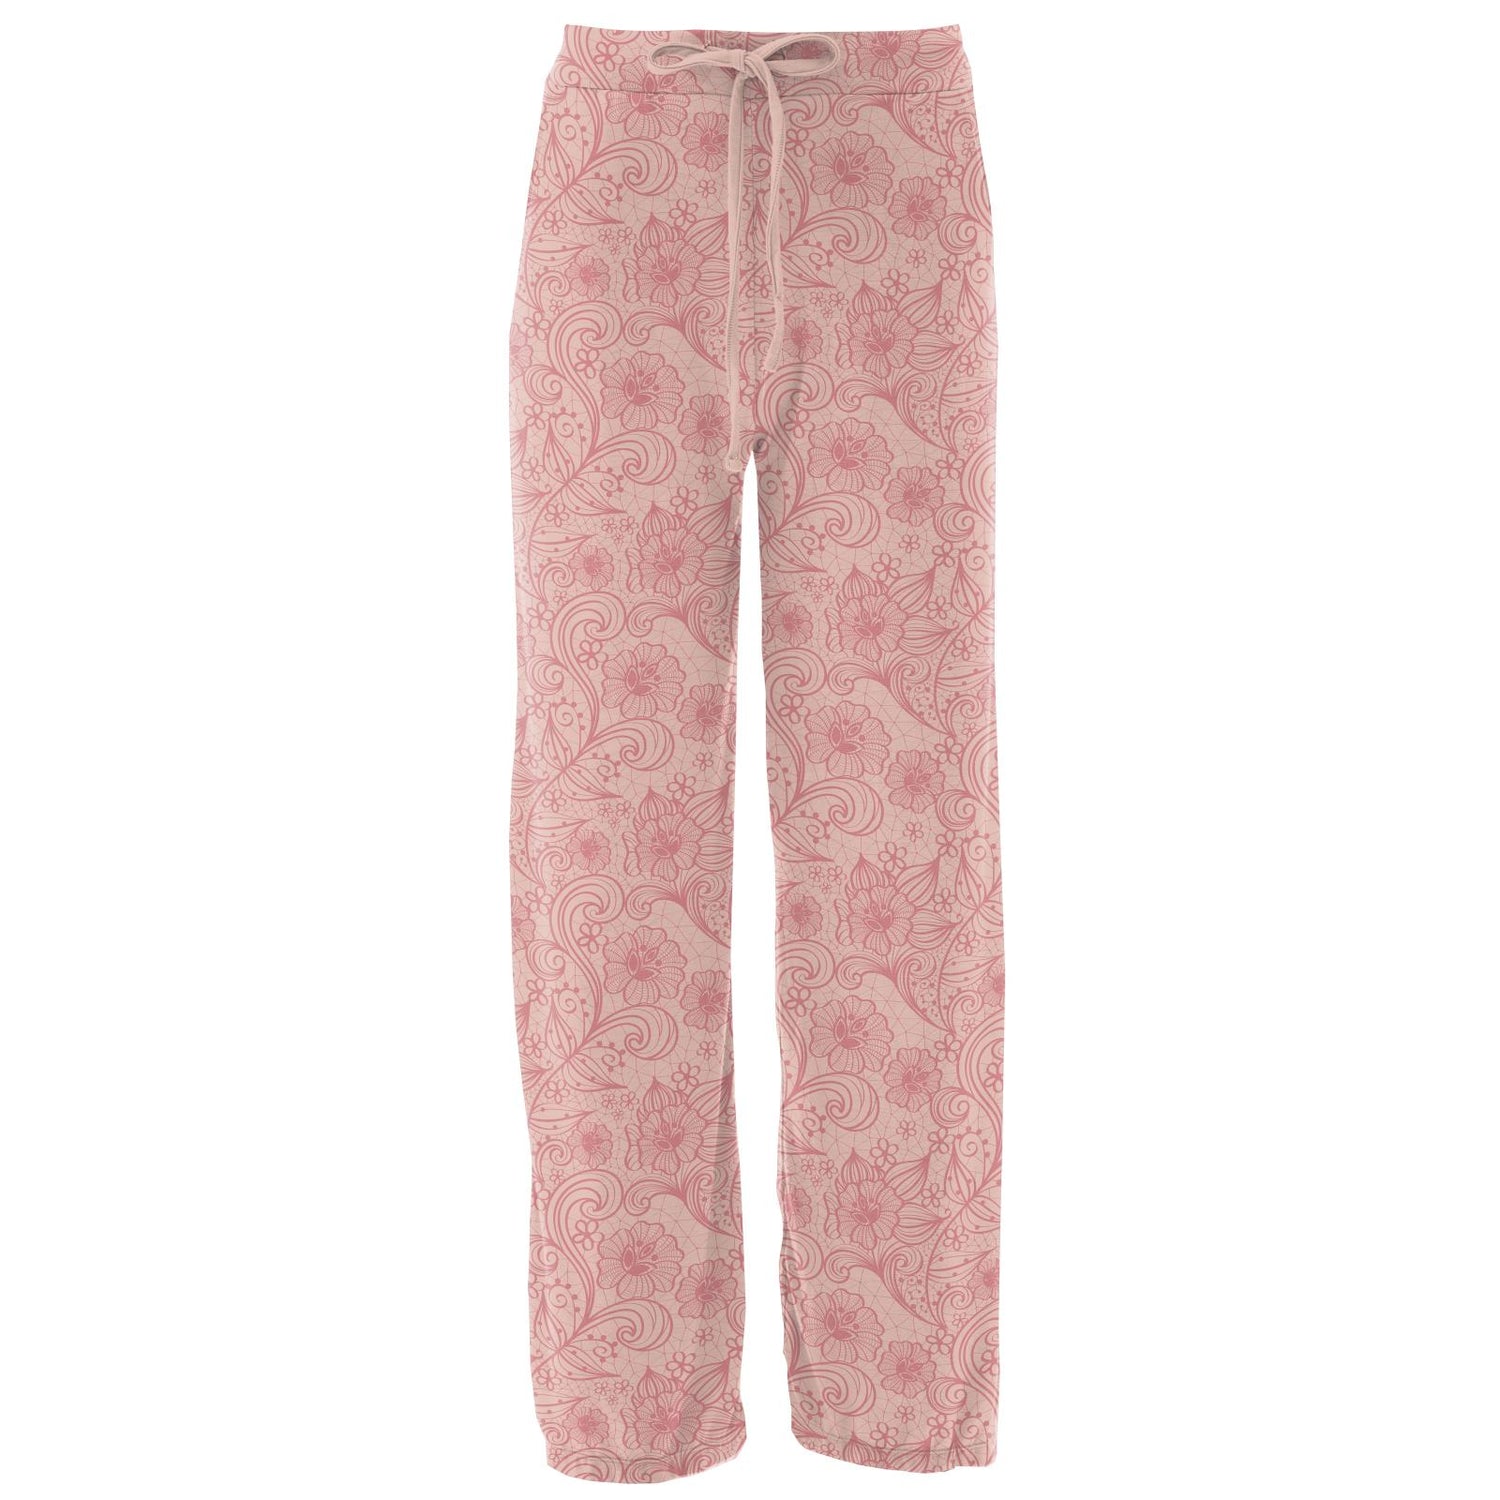 Women's Print Lounge Pants in Peach Blossom Lace